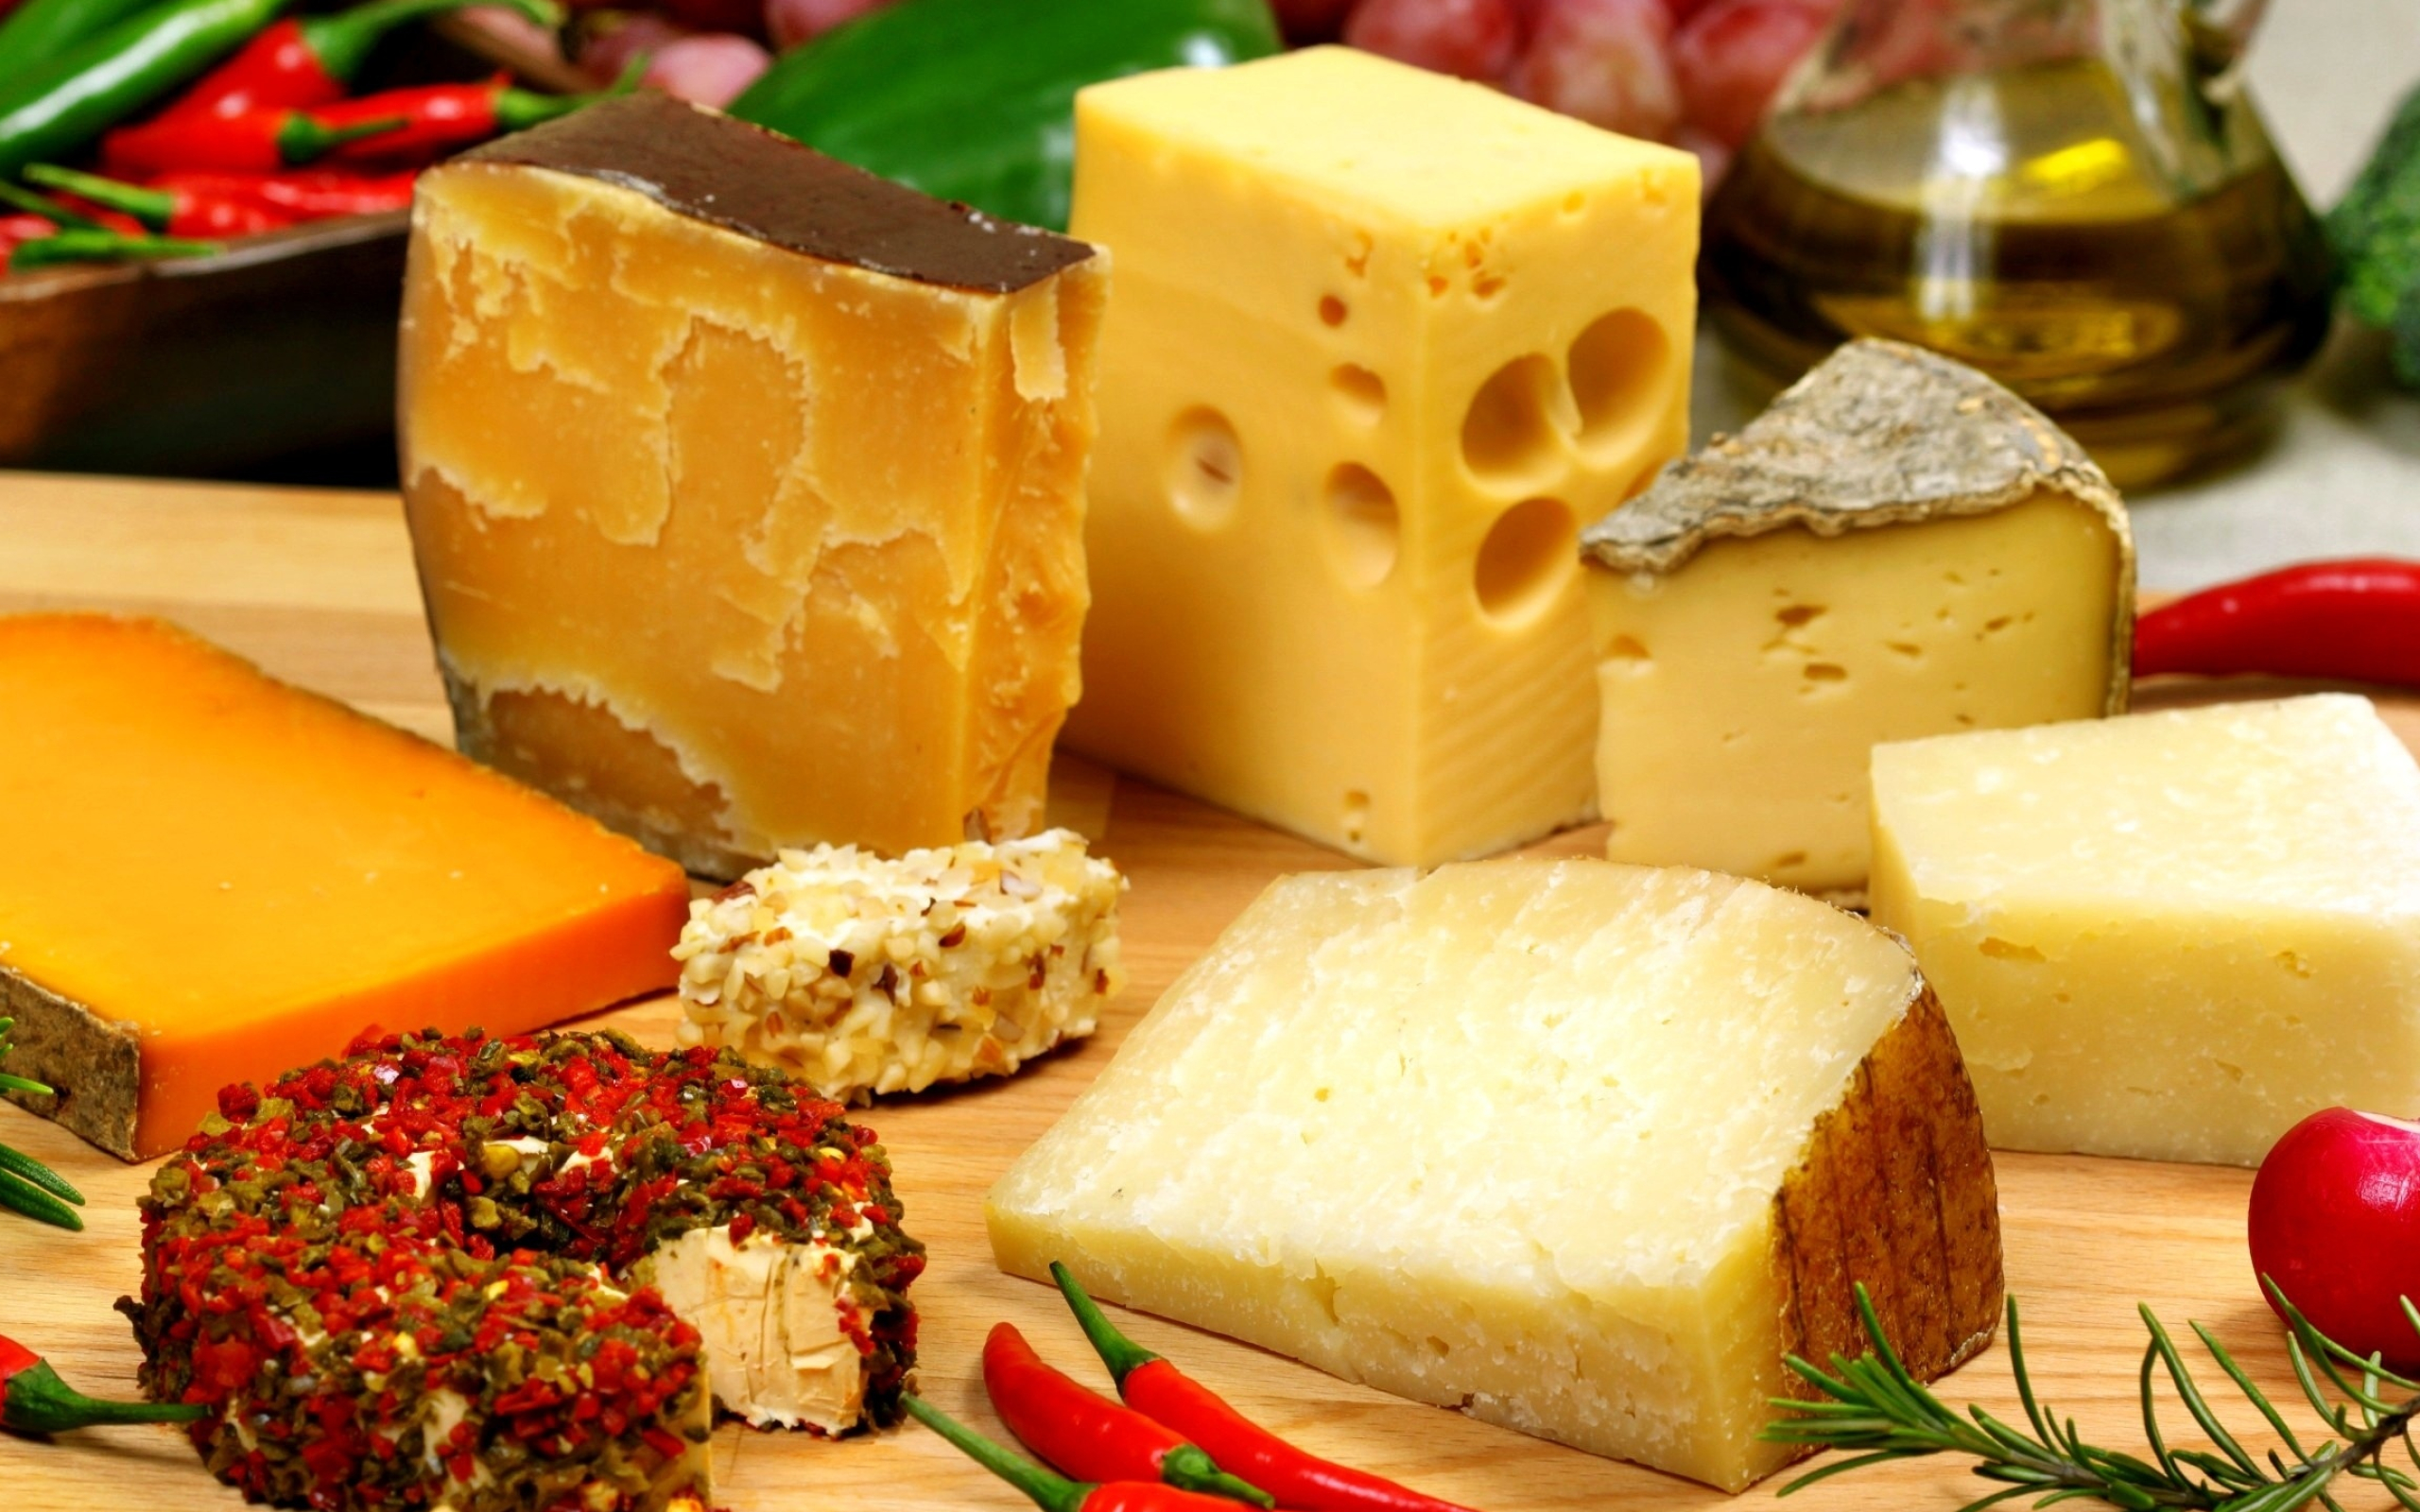 Cheese: Mozzarella, cheddar, Swiss and American, help prevent tooth decay. 2560x1600 HD Wallpaper.